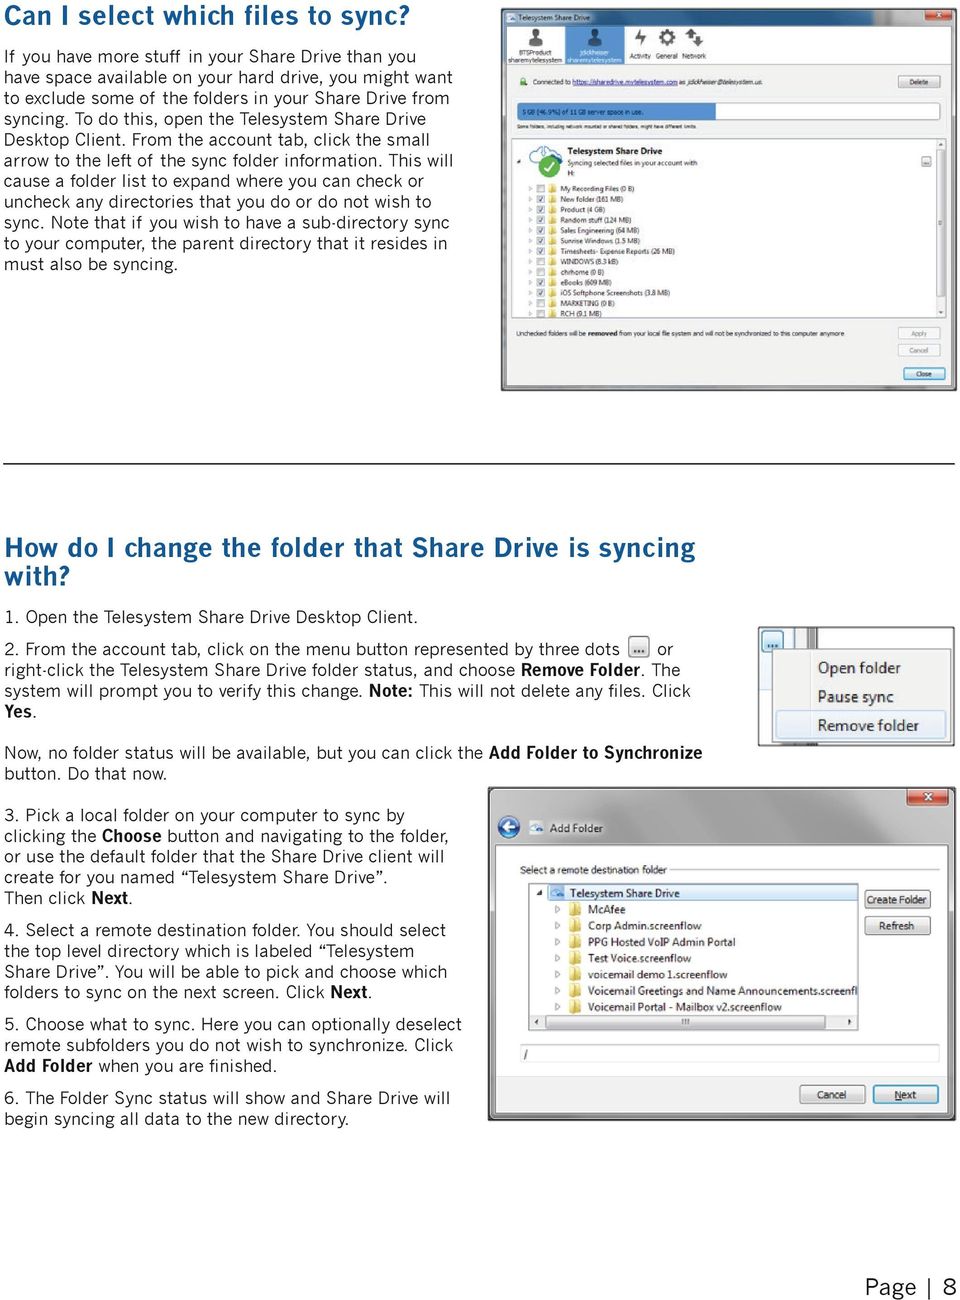 To do this, open the Telesystem Share Drive Desktop Client. From the account tab, click the small arrow to the left of the sync folder information.